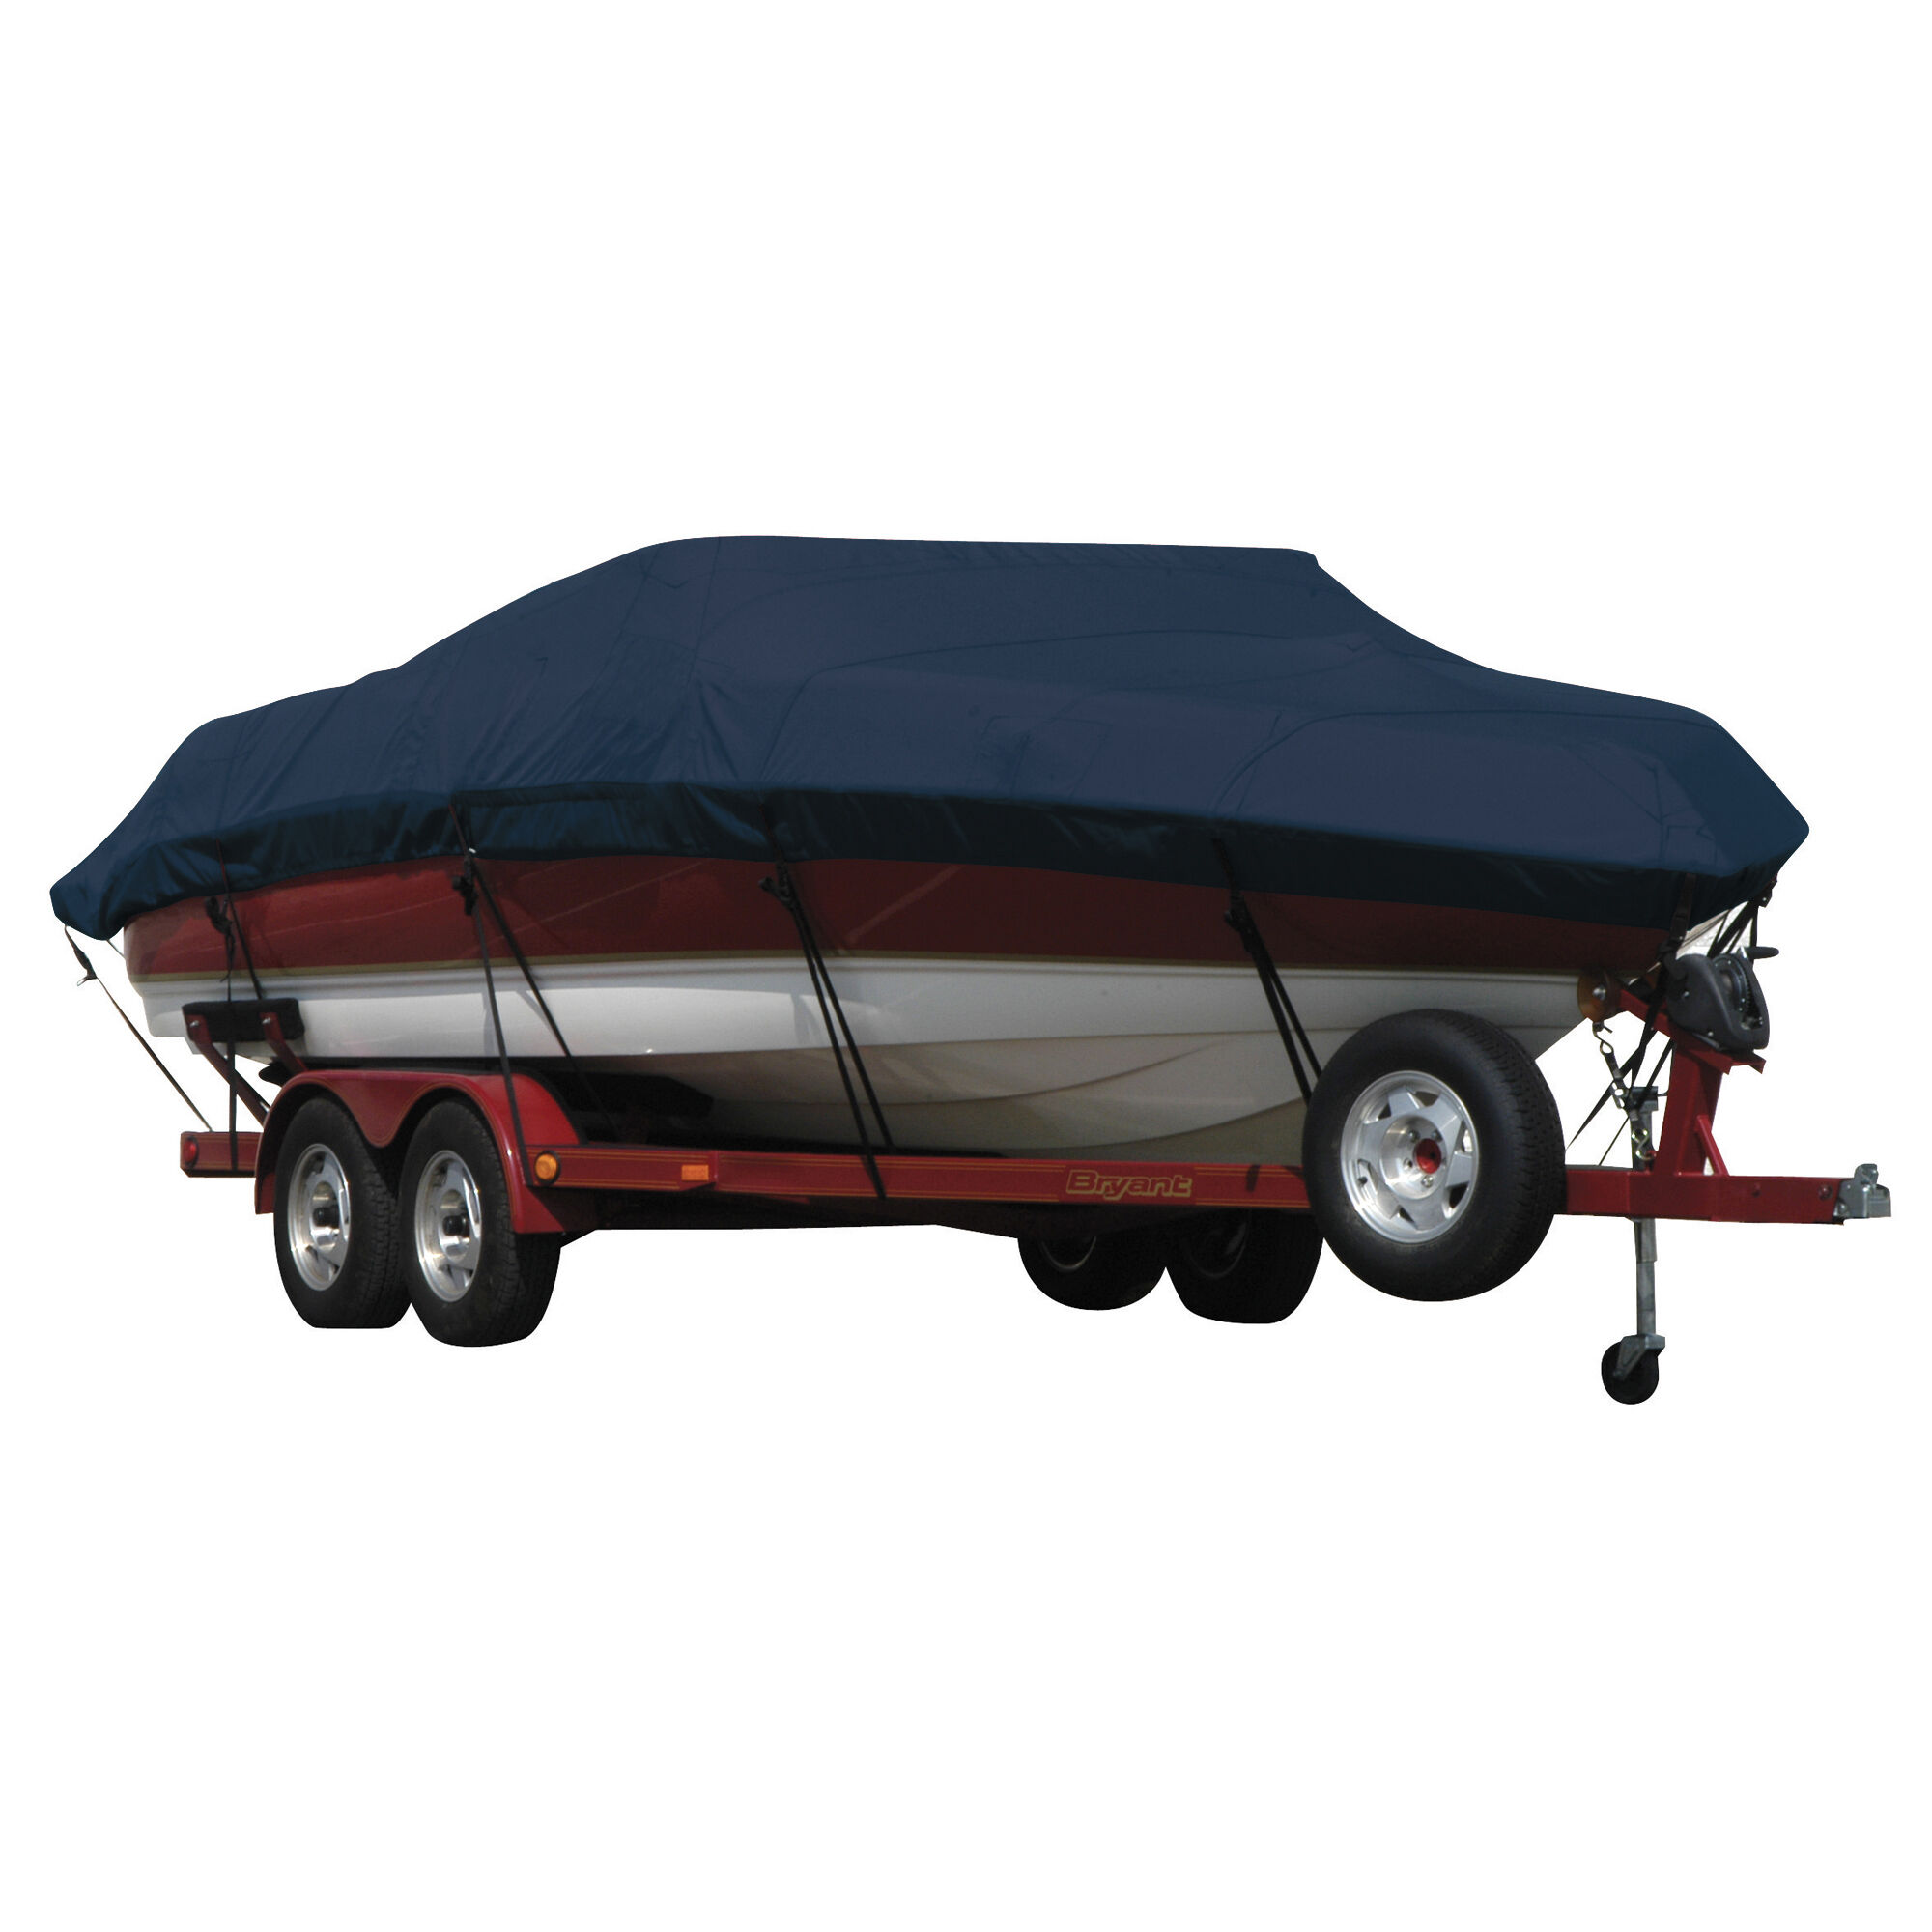 Covermate Exact Fit Sunbrella Boat Cover for Reinell/Beachcraft 191 Lse 191 Lse Br Low Profile w/ Plexi Windshield I/O. Navy in Navy Blue